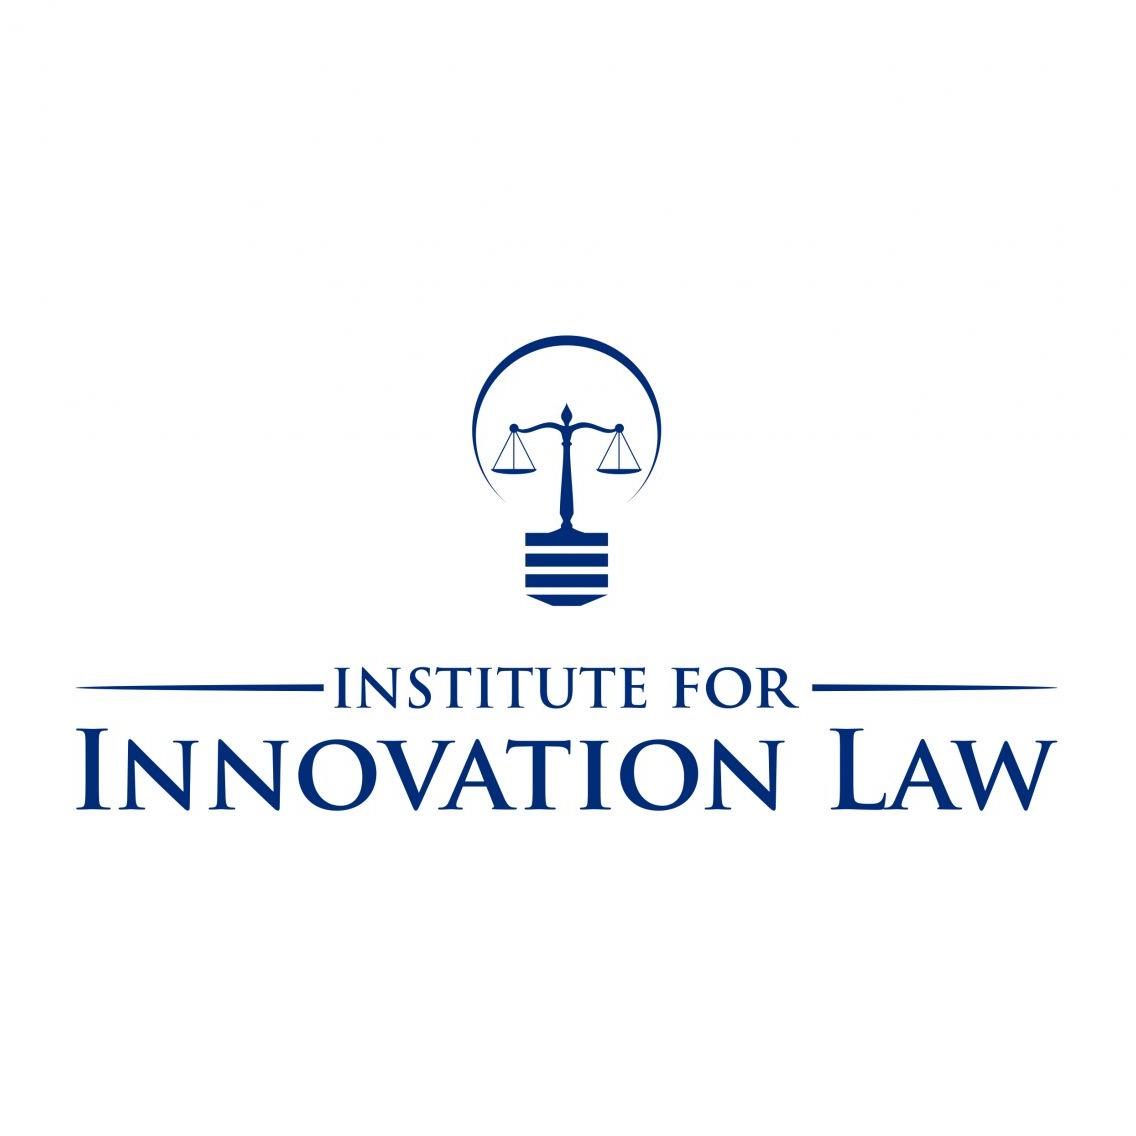 The Institute for Innovation @uchastingslaw.  Encouraging #Innovation through #Law and #Policy.  #Privacy&Tech #PatentPolicy #StartupLegalGarage #Startups